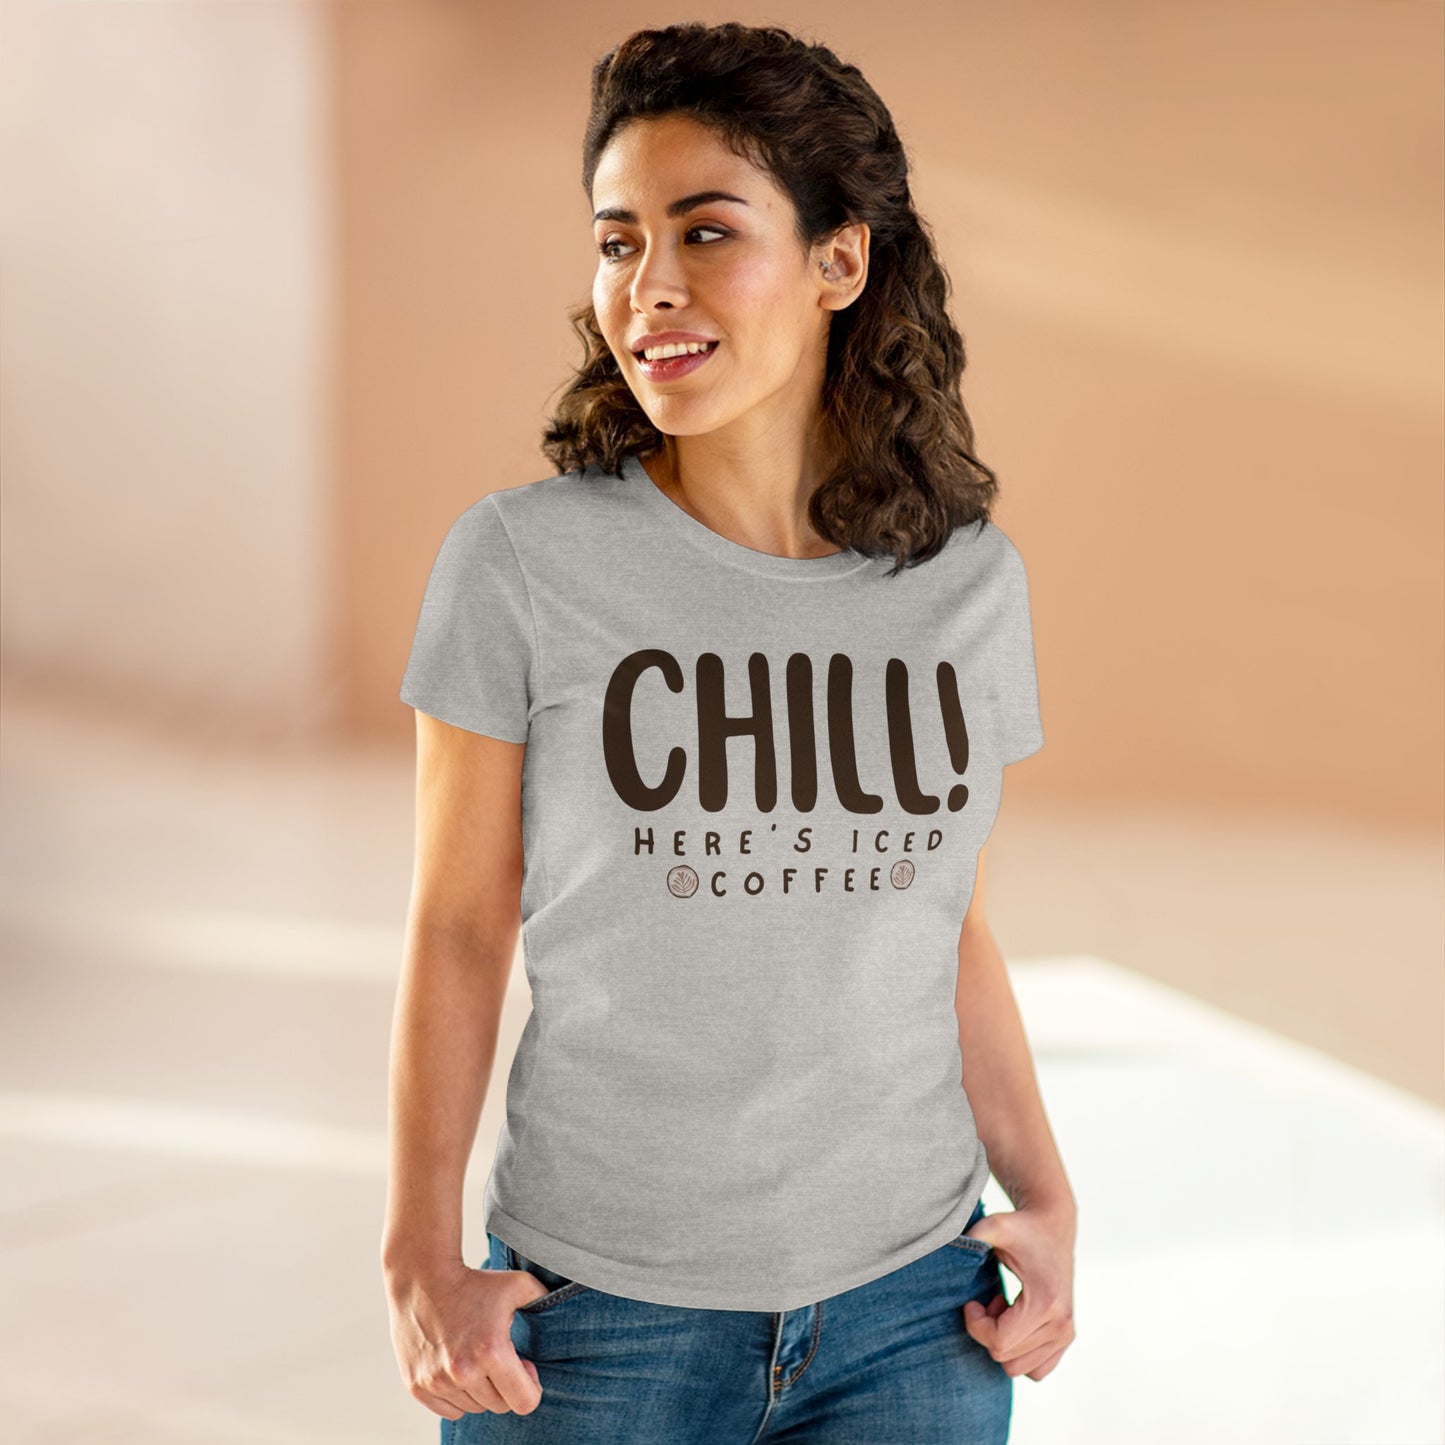 Chill! Here's Iced Coffee Shirt